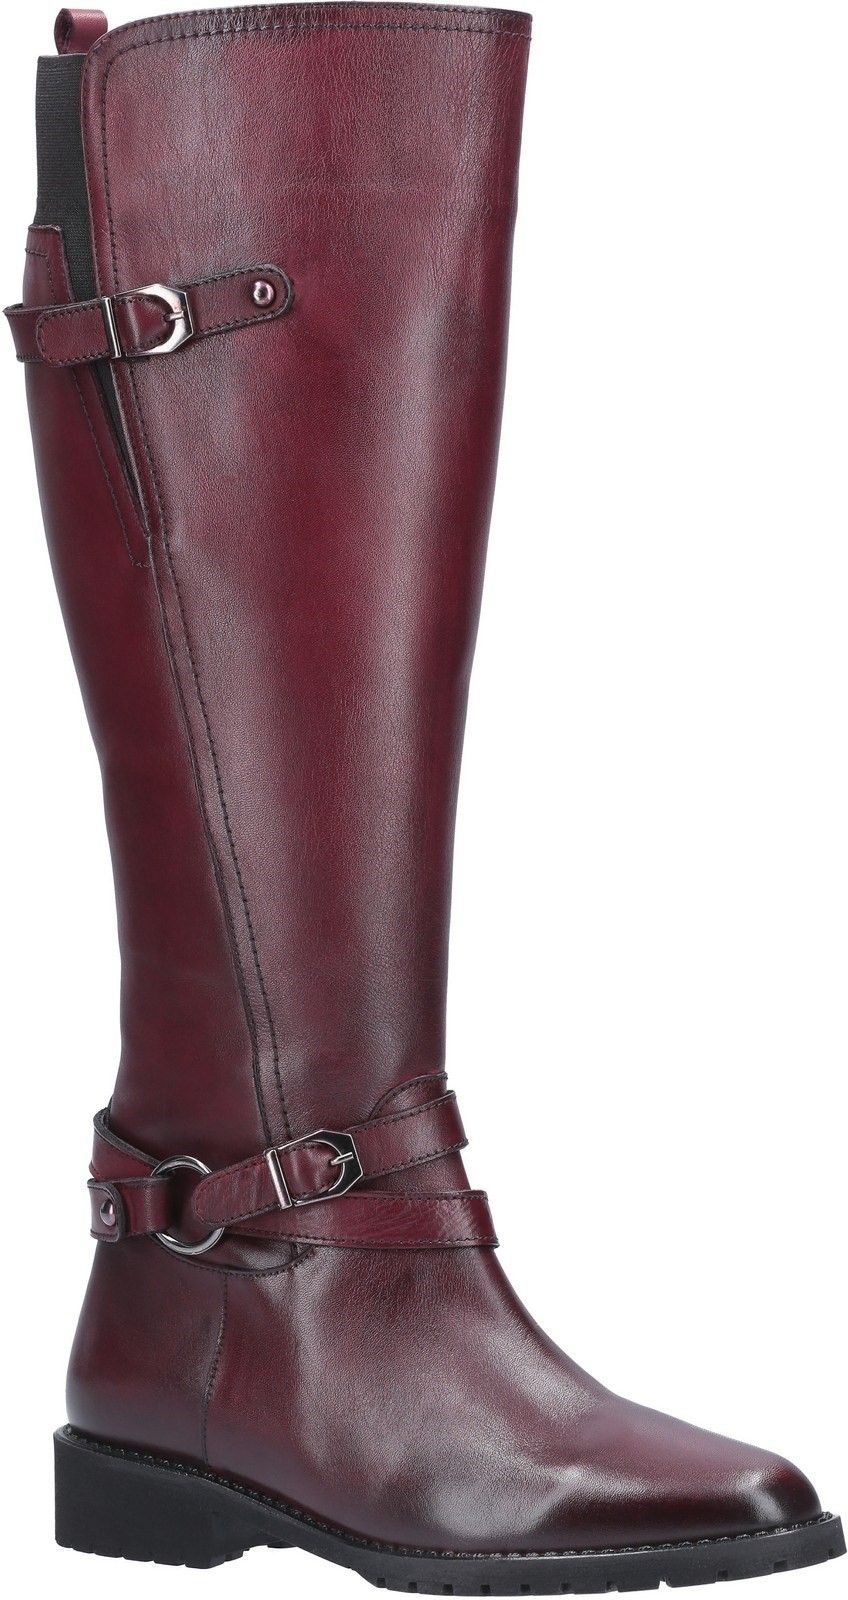 Athens from Riva is a chic, stand out long boot for the autumn/winter season. Its soft, leather uppers with decorative buckle detailing gives a stylish look. It also has a full side zip and rear elasticated panel for easy on and off and block heel. Soft Leather. 
Buckle Detailing. 
Full Side Zip. 
Rear Pull Loop. 
Block Heel.